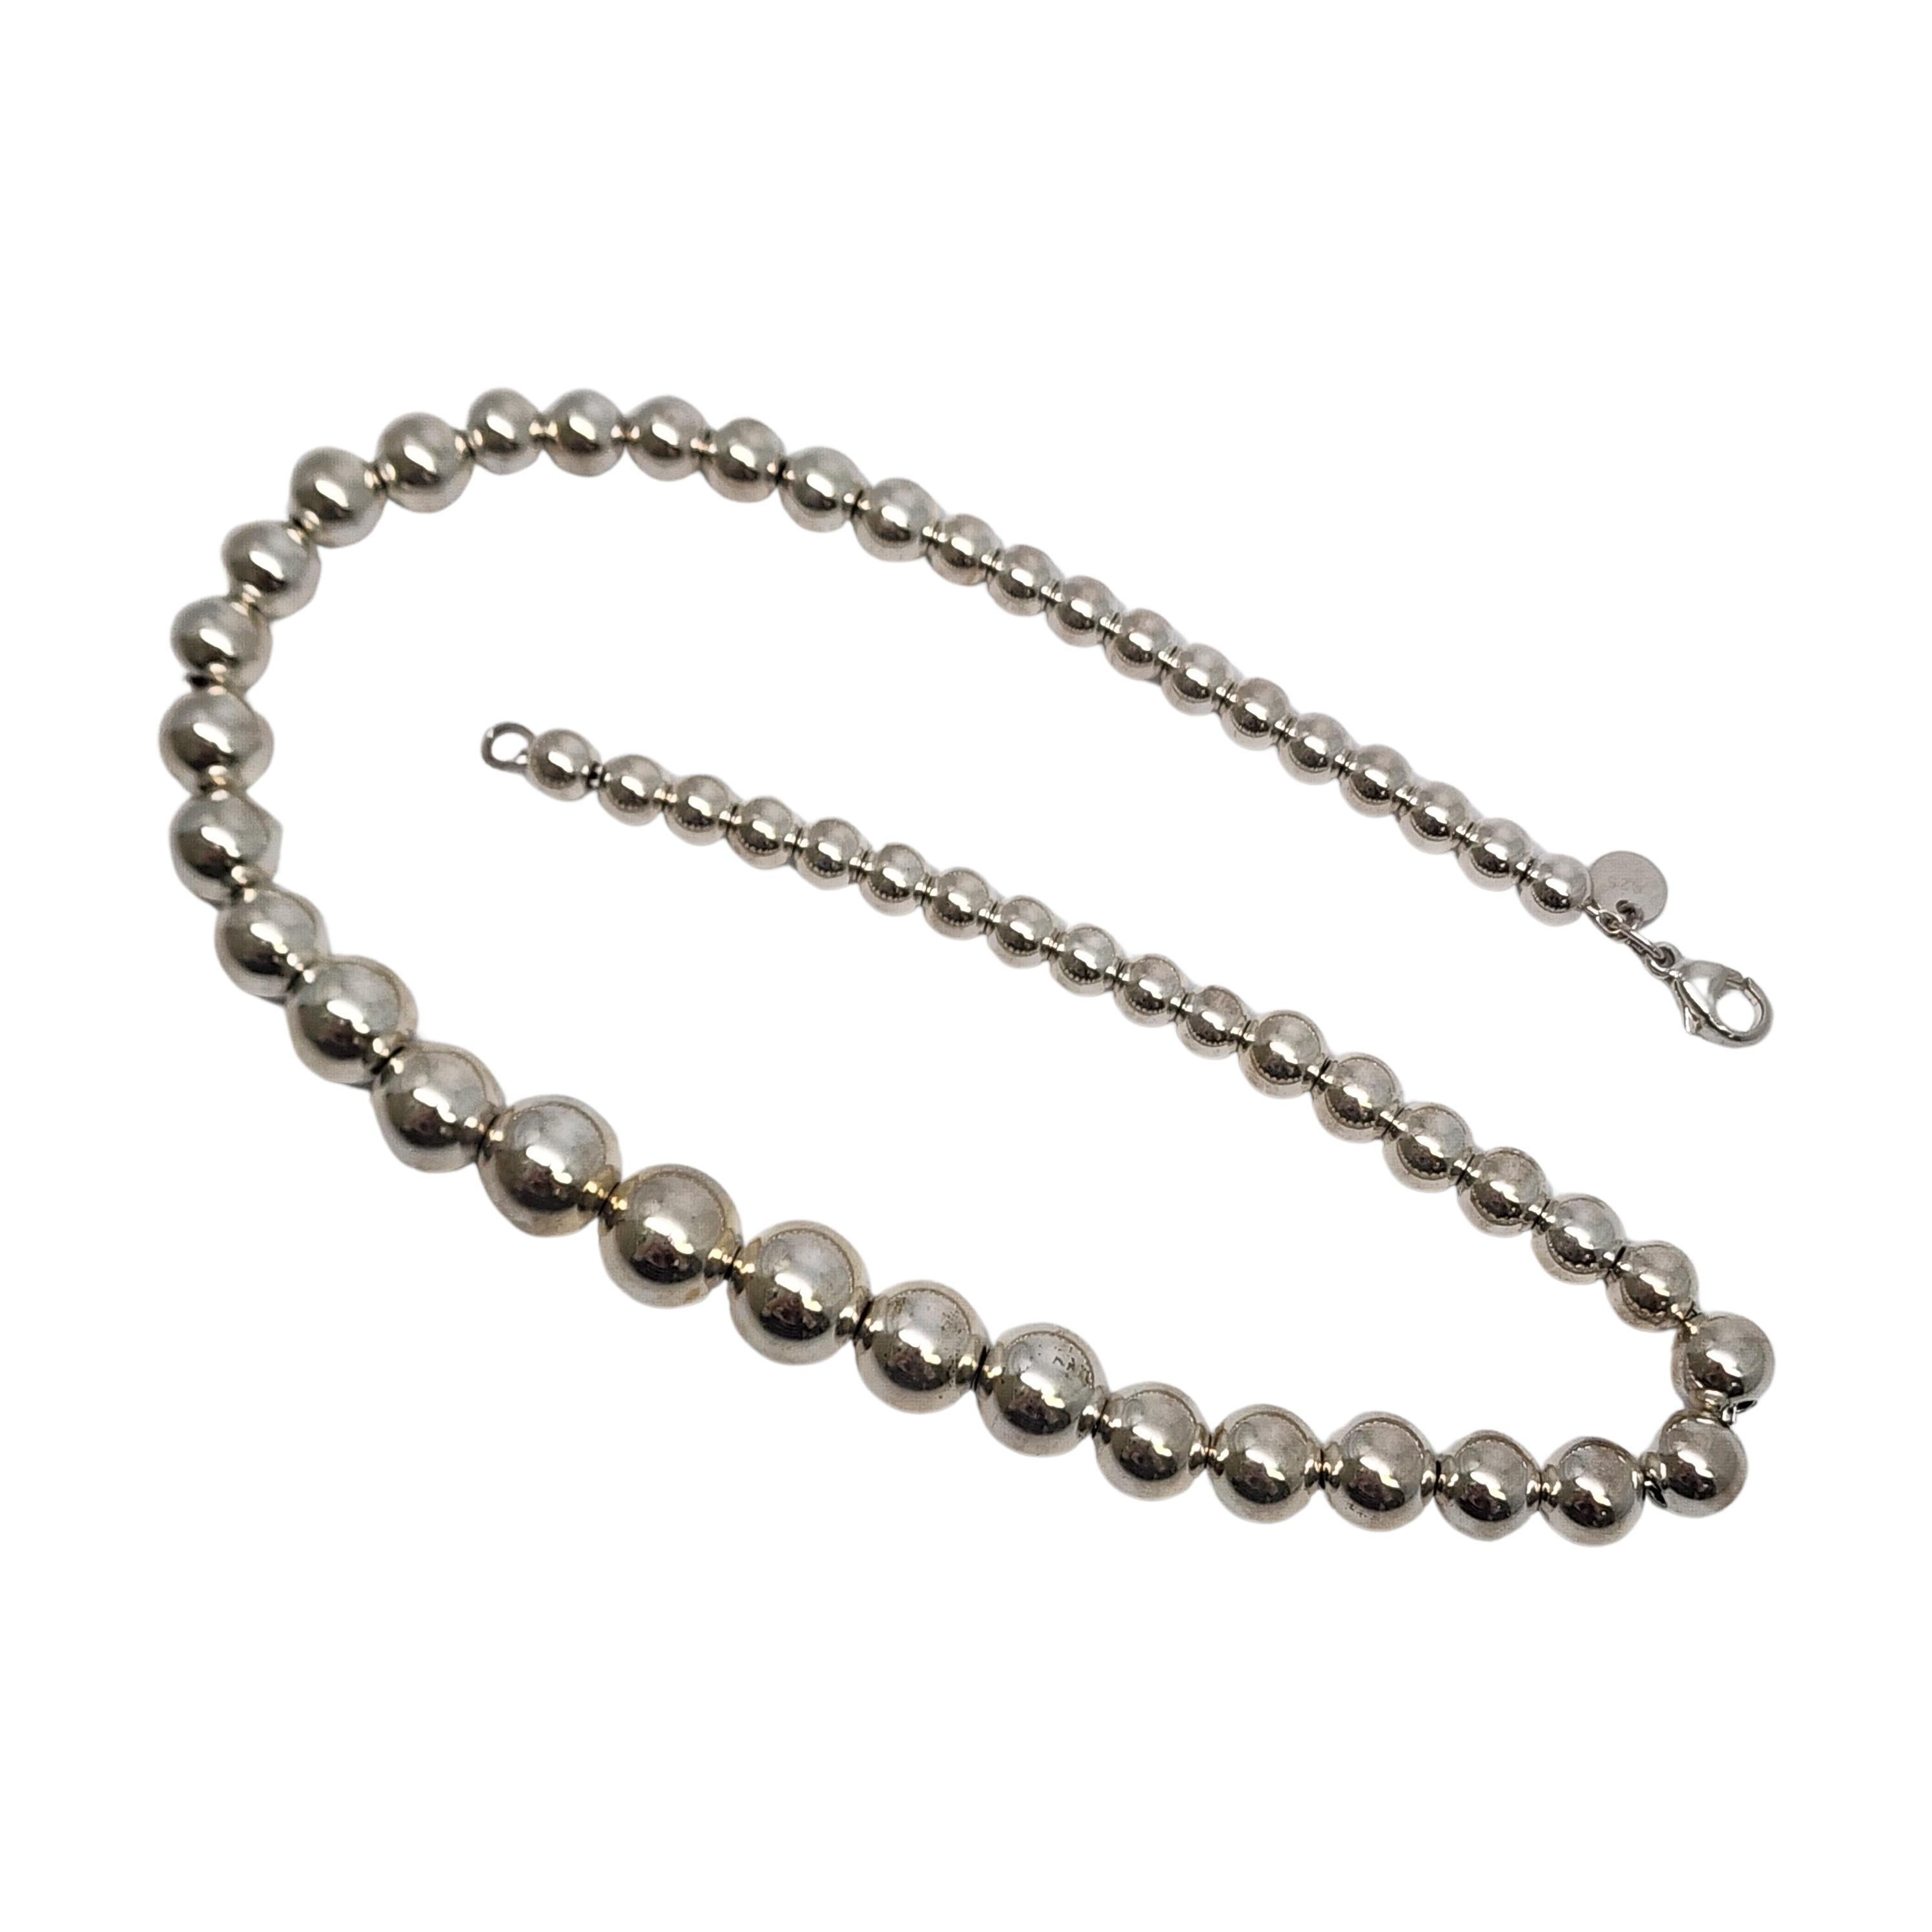 Tiffany & Co Sterling Silver Graduated Ball Bead Necklace 16